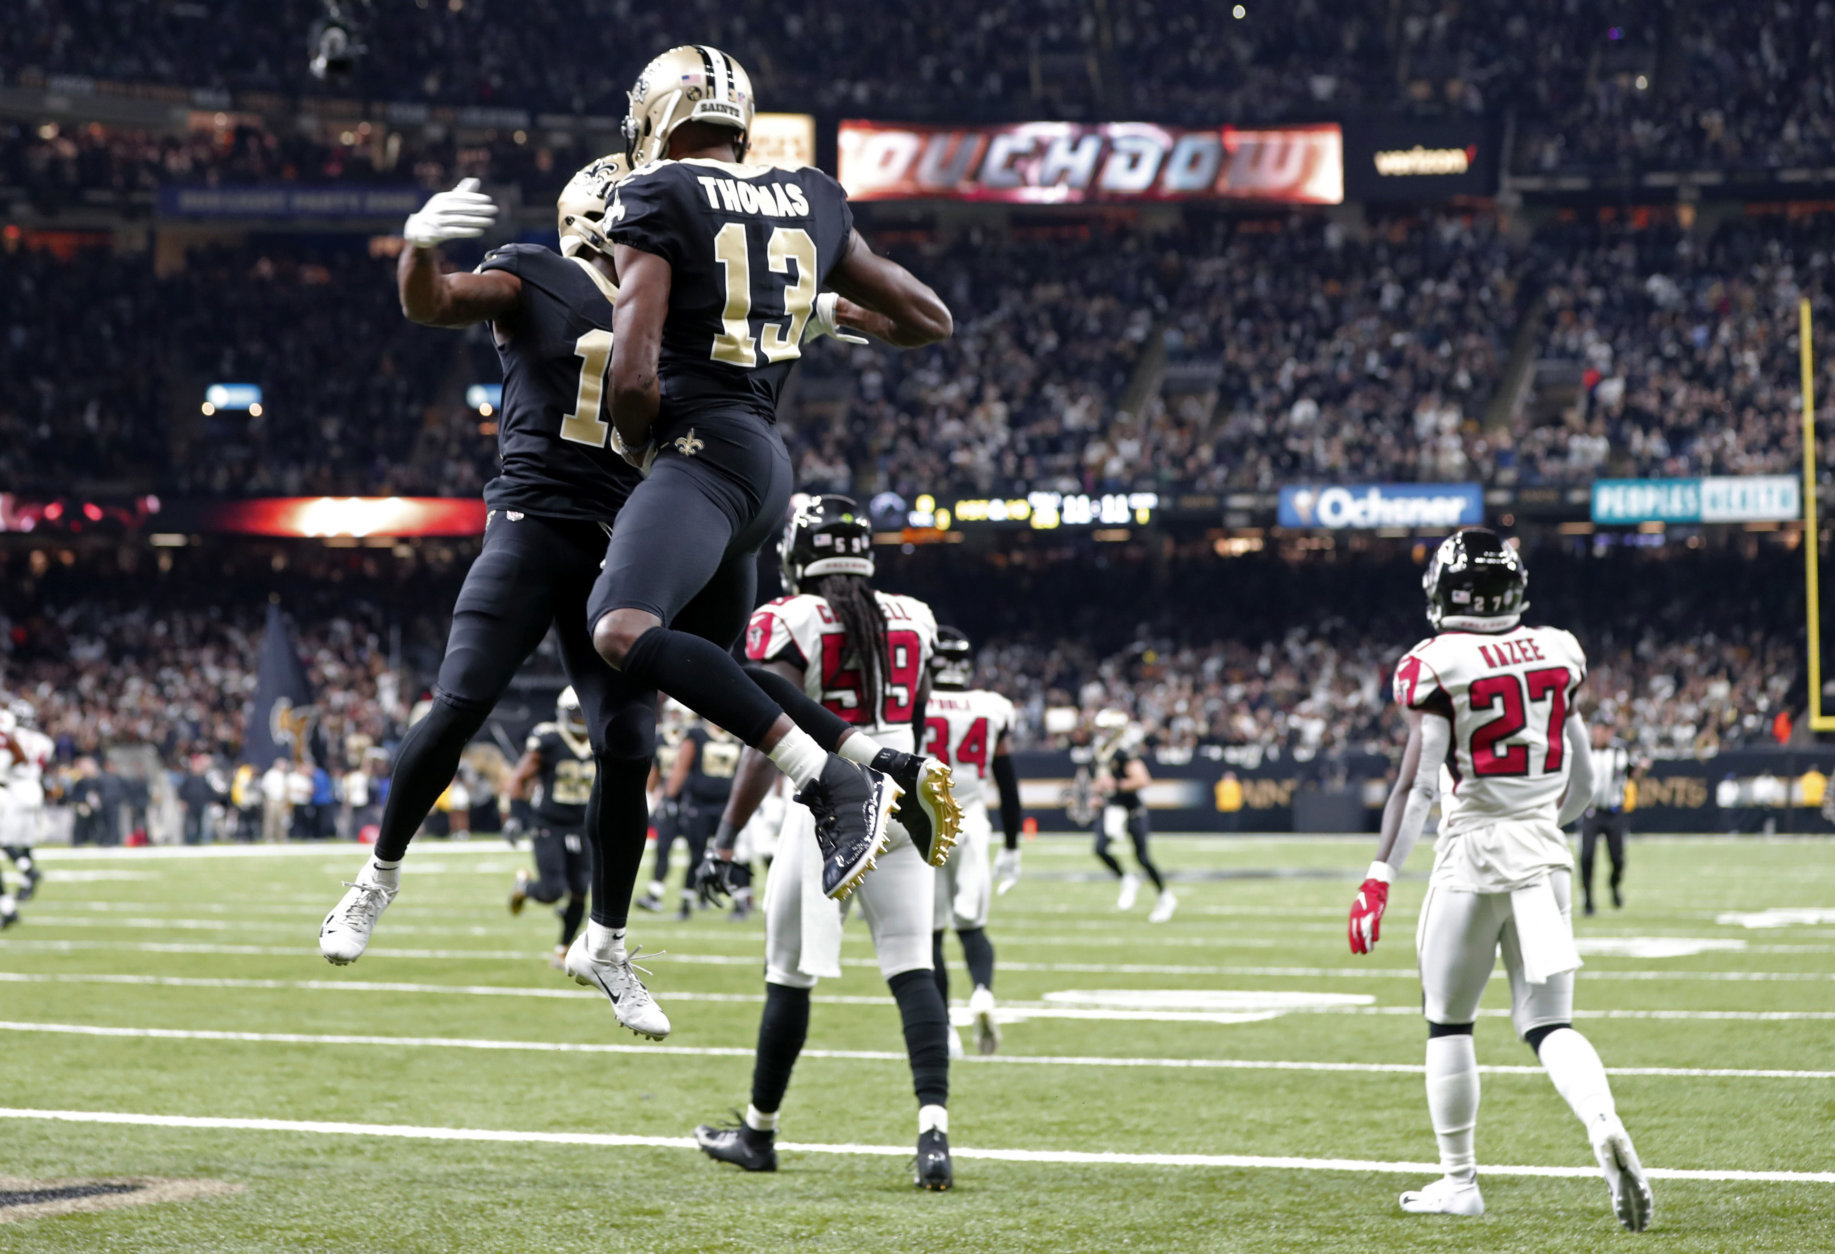 New Orleans Saints wide receiver Tommylee Lewis celebrates his touchdown reception with wide receiver Michael Thomas (13) in the first half of an NFL football game against the Atlanta Falcons in New Orleans, Thursday, Nov. 22, 2018. (AP Photo/Gerald Herbert)